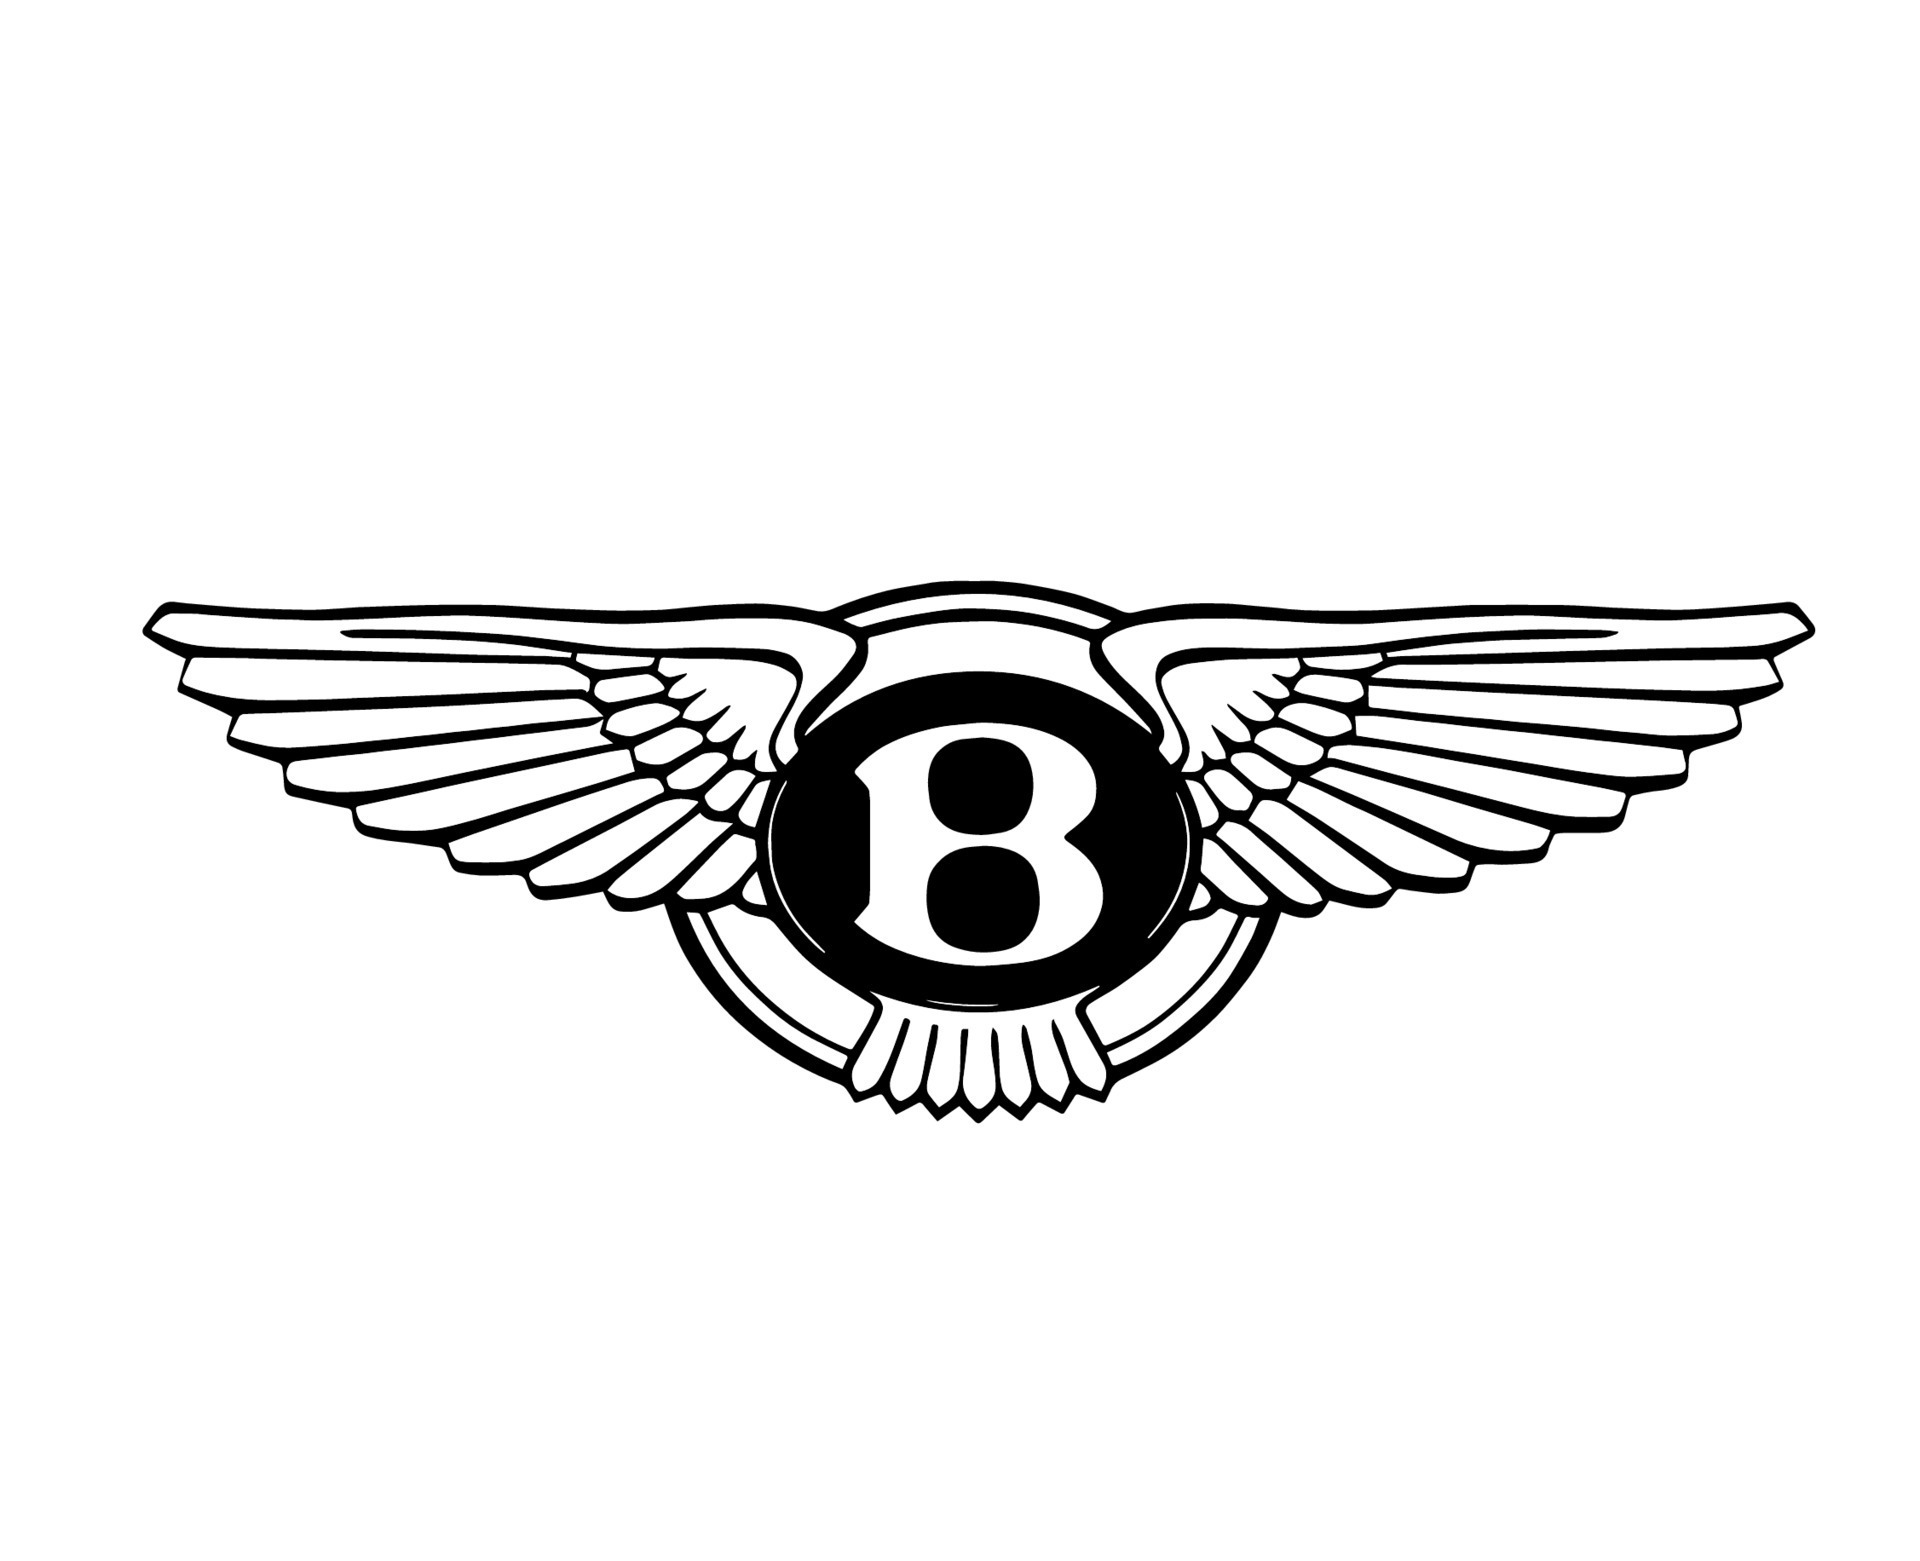 Bentley Logo on the Bonnet of a Black Car Editorial Photo - Image of june,  british: 150696091